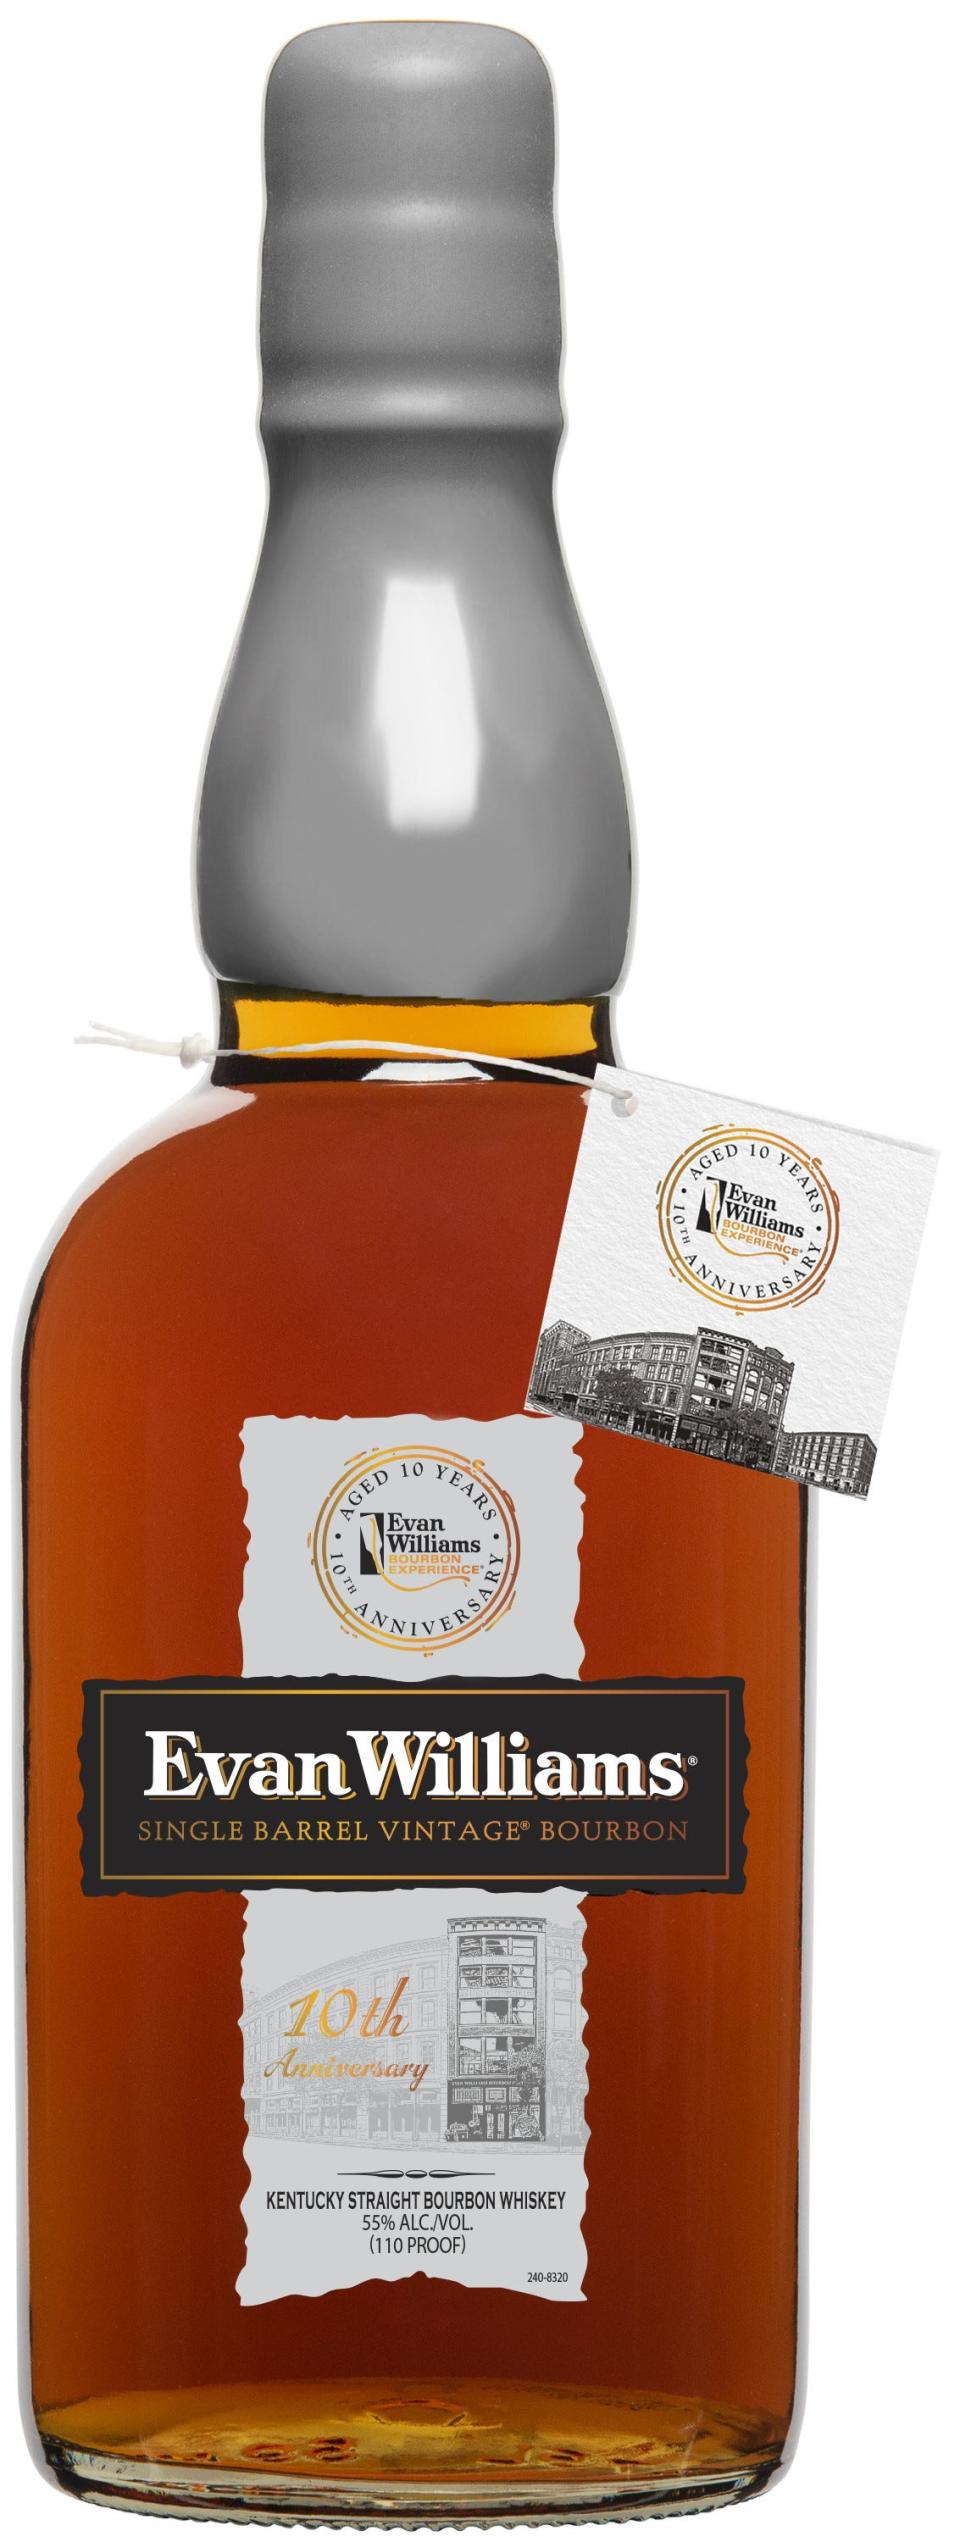 The 2013 vintage Evan Williams Bourbon Experience bourbon is bottled at 110 proof, commemorating the 10th anniversary, is hand-dipped in silver wax and features imagery of the Evan Williams Bourbon Experience on its label and tag.